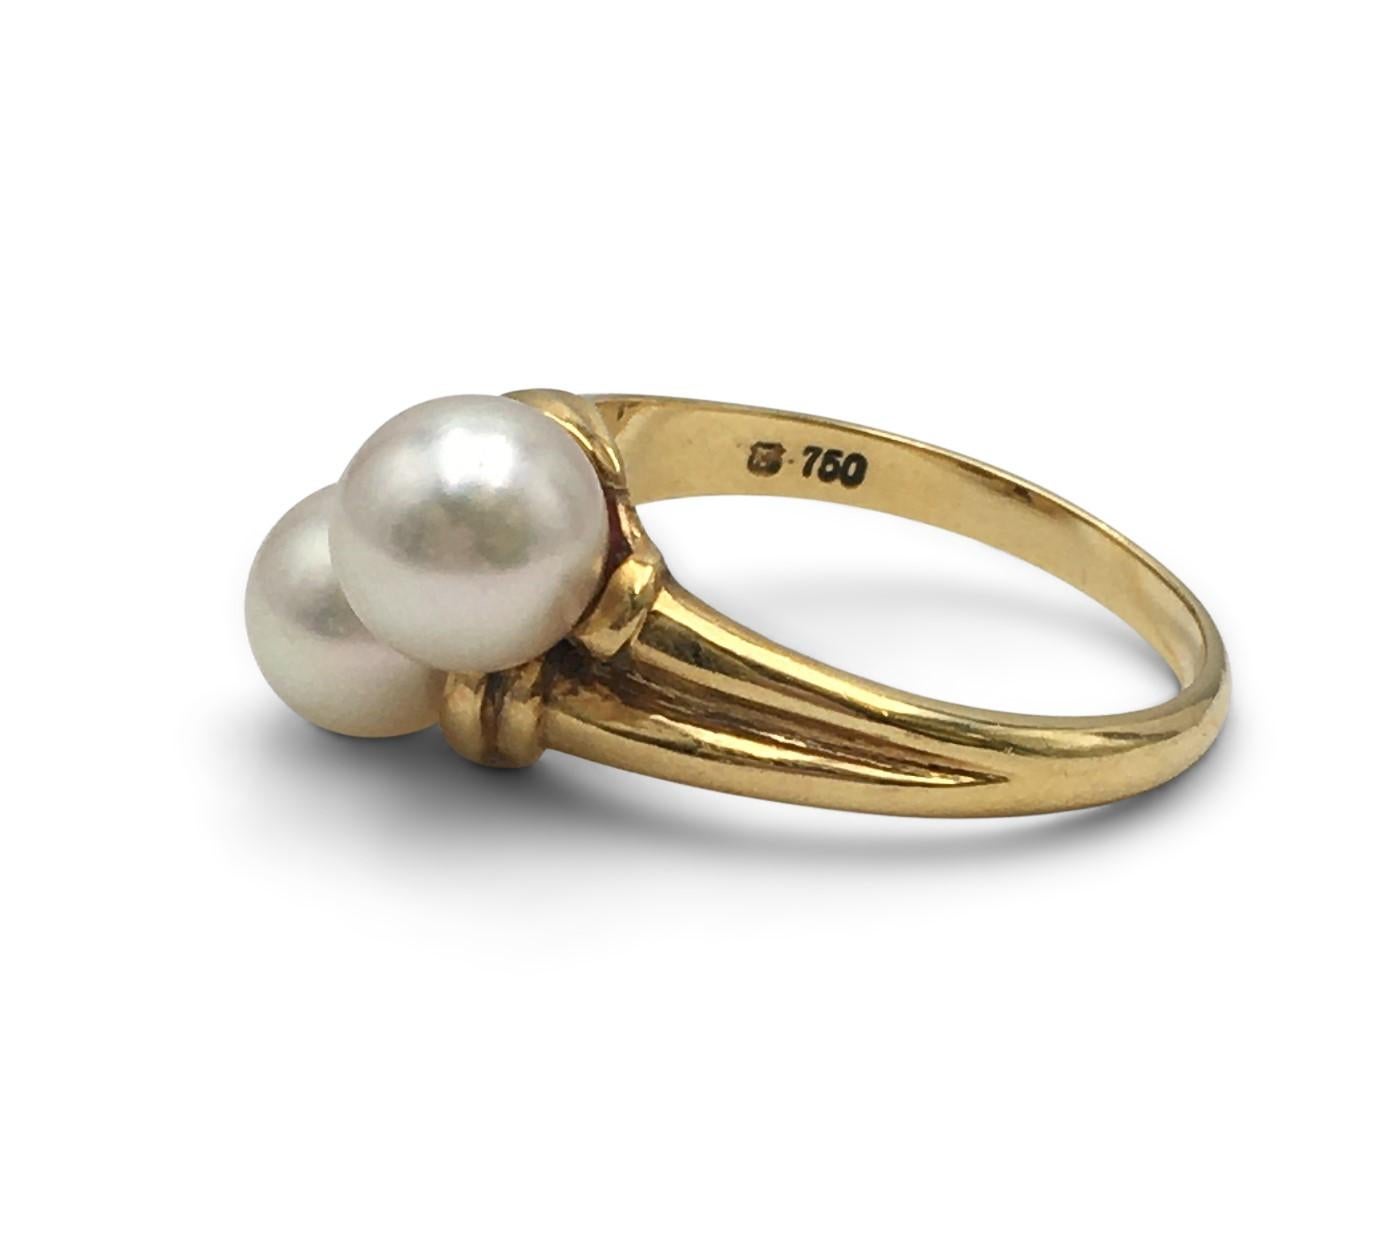 Authentic Mikimoto 18 karat yellow gold and south sea pearl bypass ring. The pearls measure 7mm each and are well matched in color and size. Signs of light wear present, no damage. Signed M, 750. Ring size 7. The ring does not come with original box